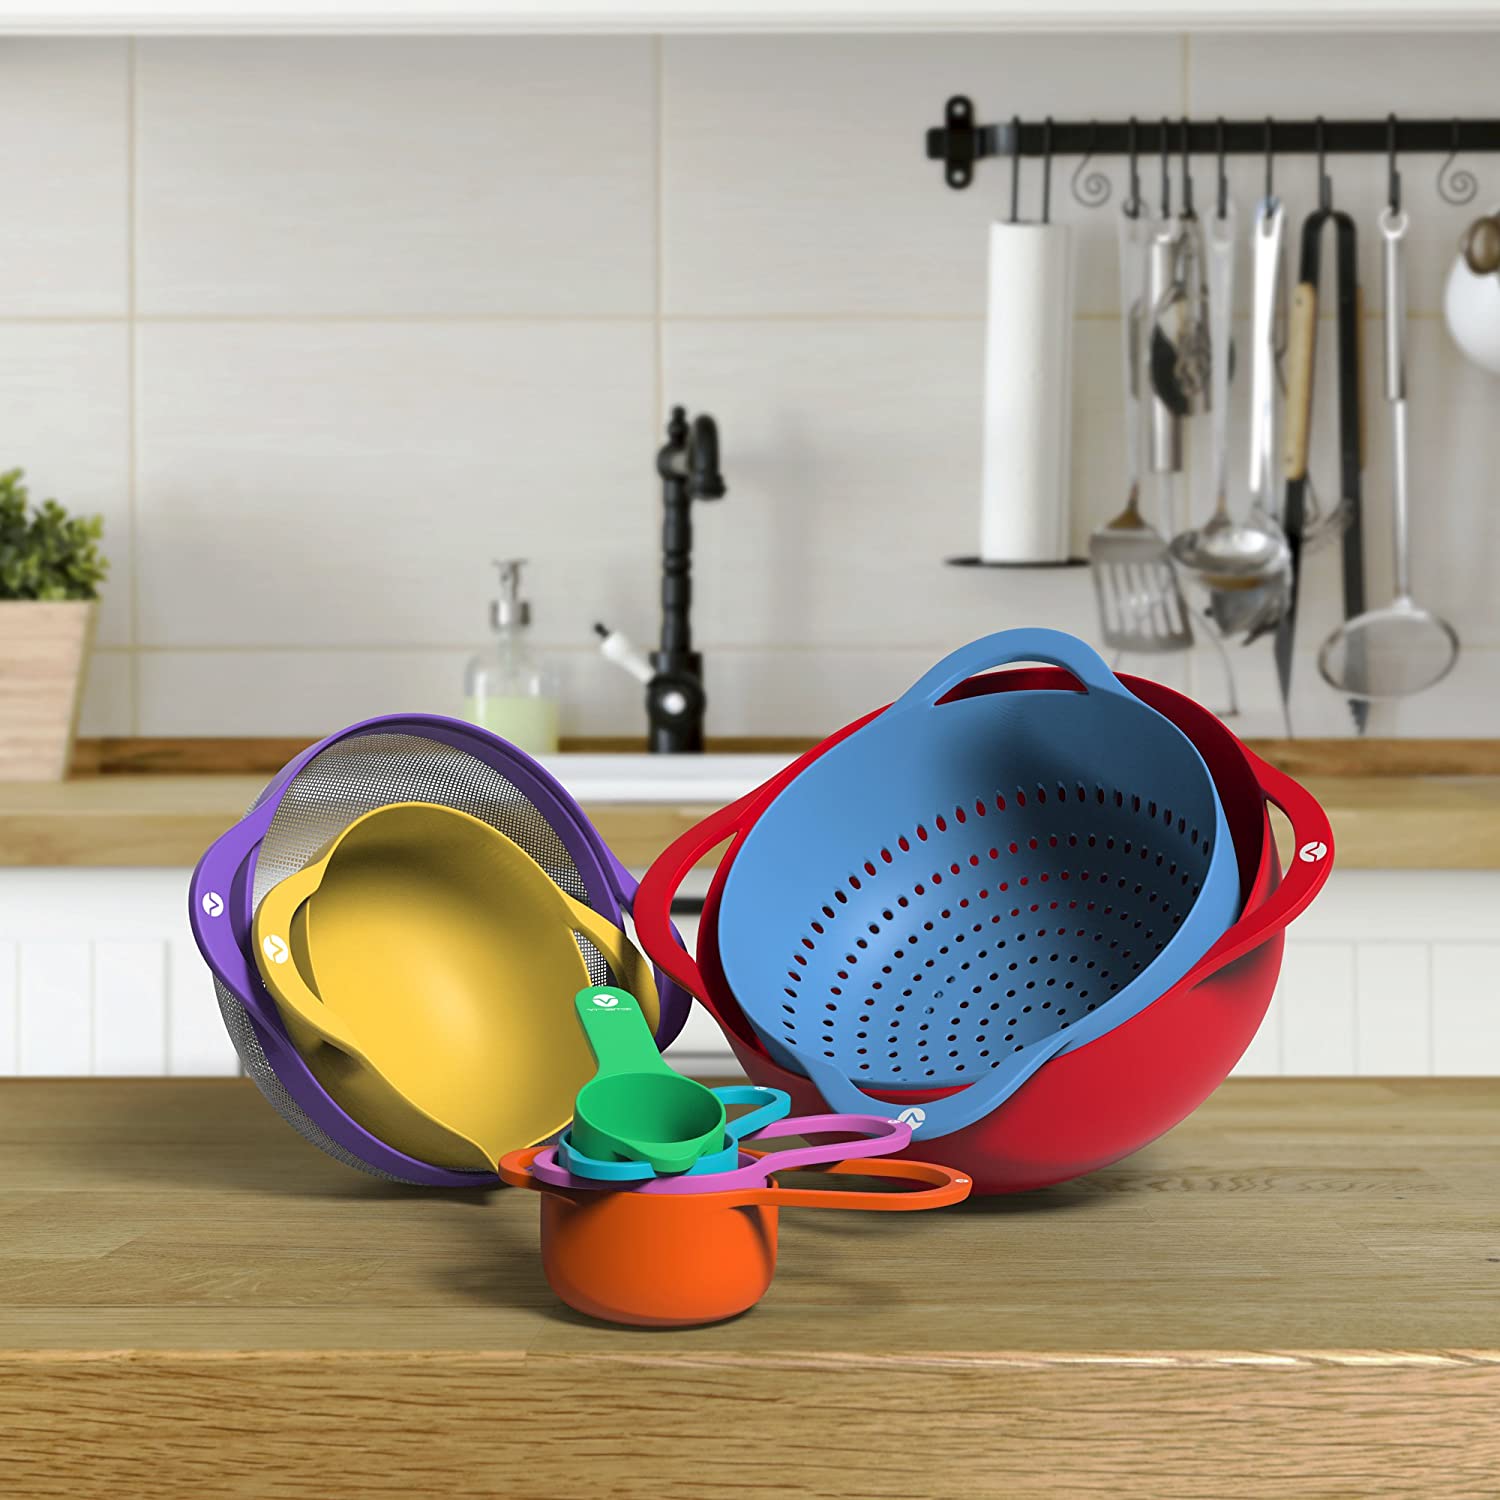 Vremi 13 Piece Mixing Bowl Set - Colorful Kitchen Bowls Colander Mesh Strainer with Handles Measuring Cups and Spoons - BPA Free Plastic Nesting Bowls with Easy Pour Spout for Baking Cooking and More